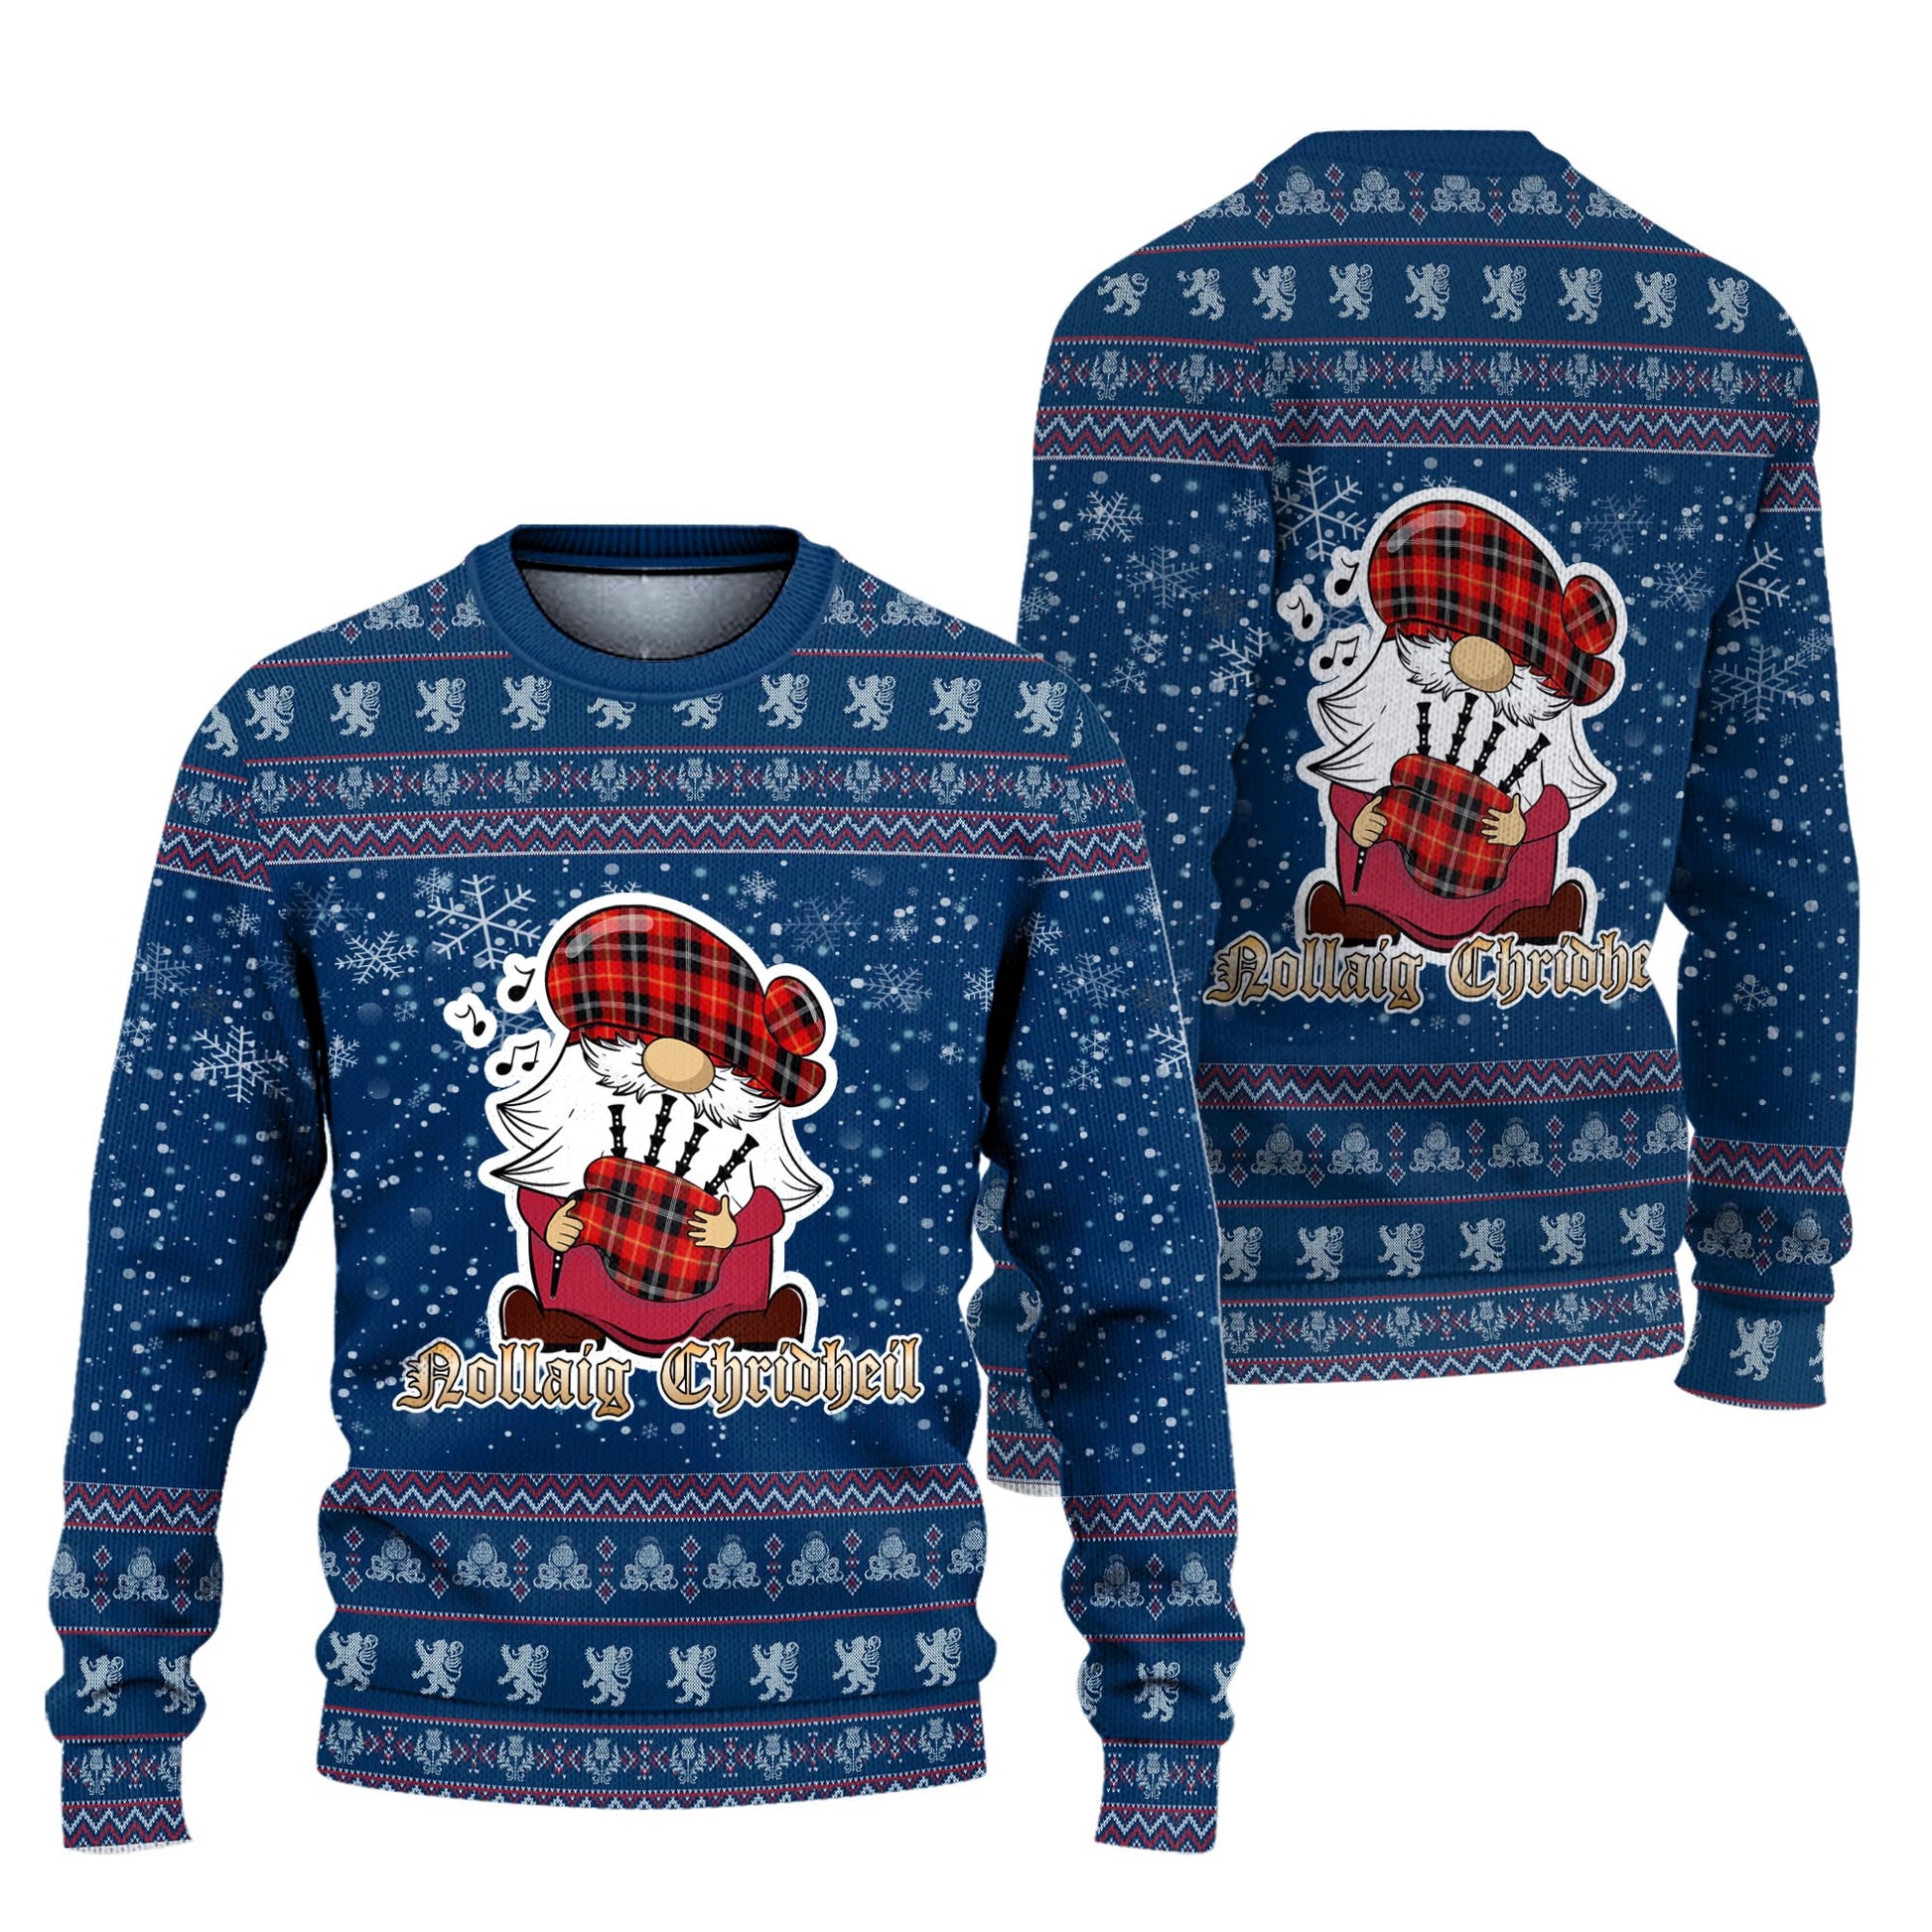 Majoribanks Clan Christmas Family Knitted Sweater with Funny Gnome Playing Bagpipes Unisex Blue - Tartanvibesclothing